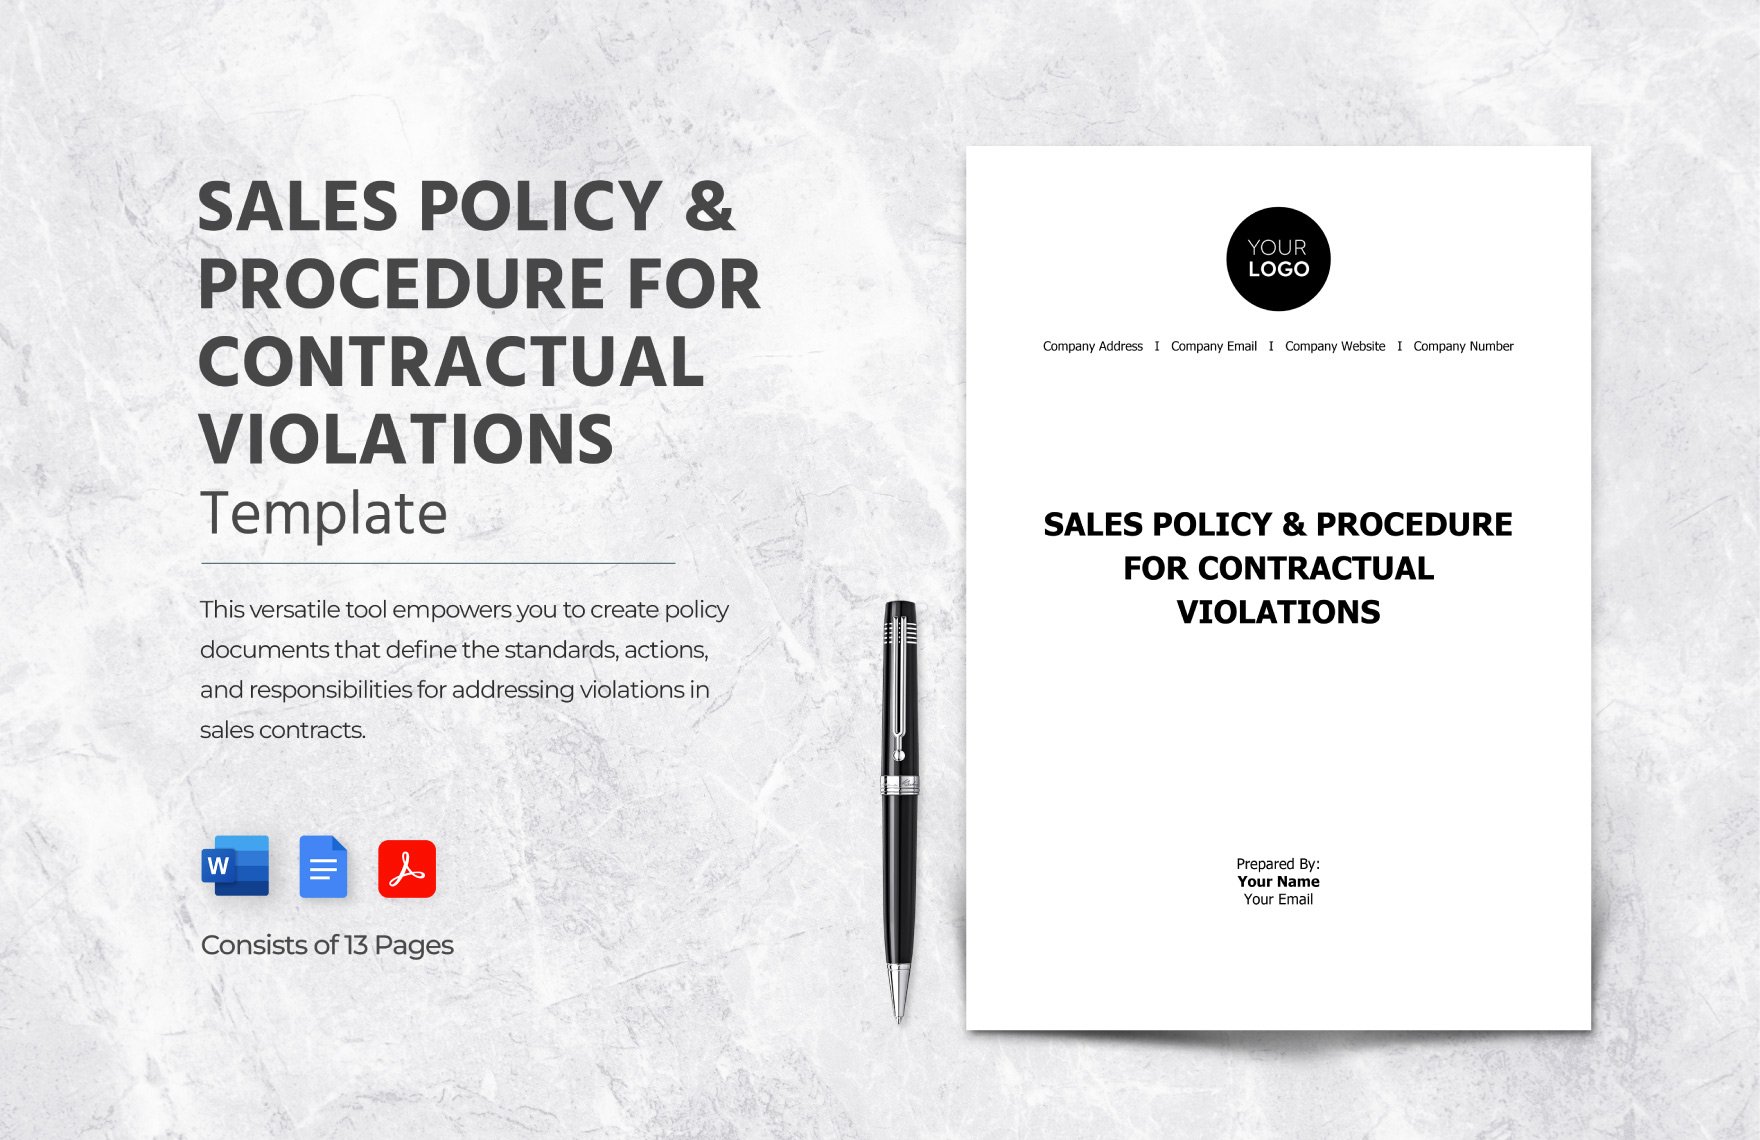 Sales Policy & Procedure for Contractual Violations Template